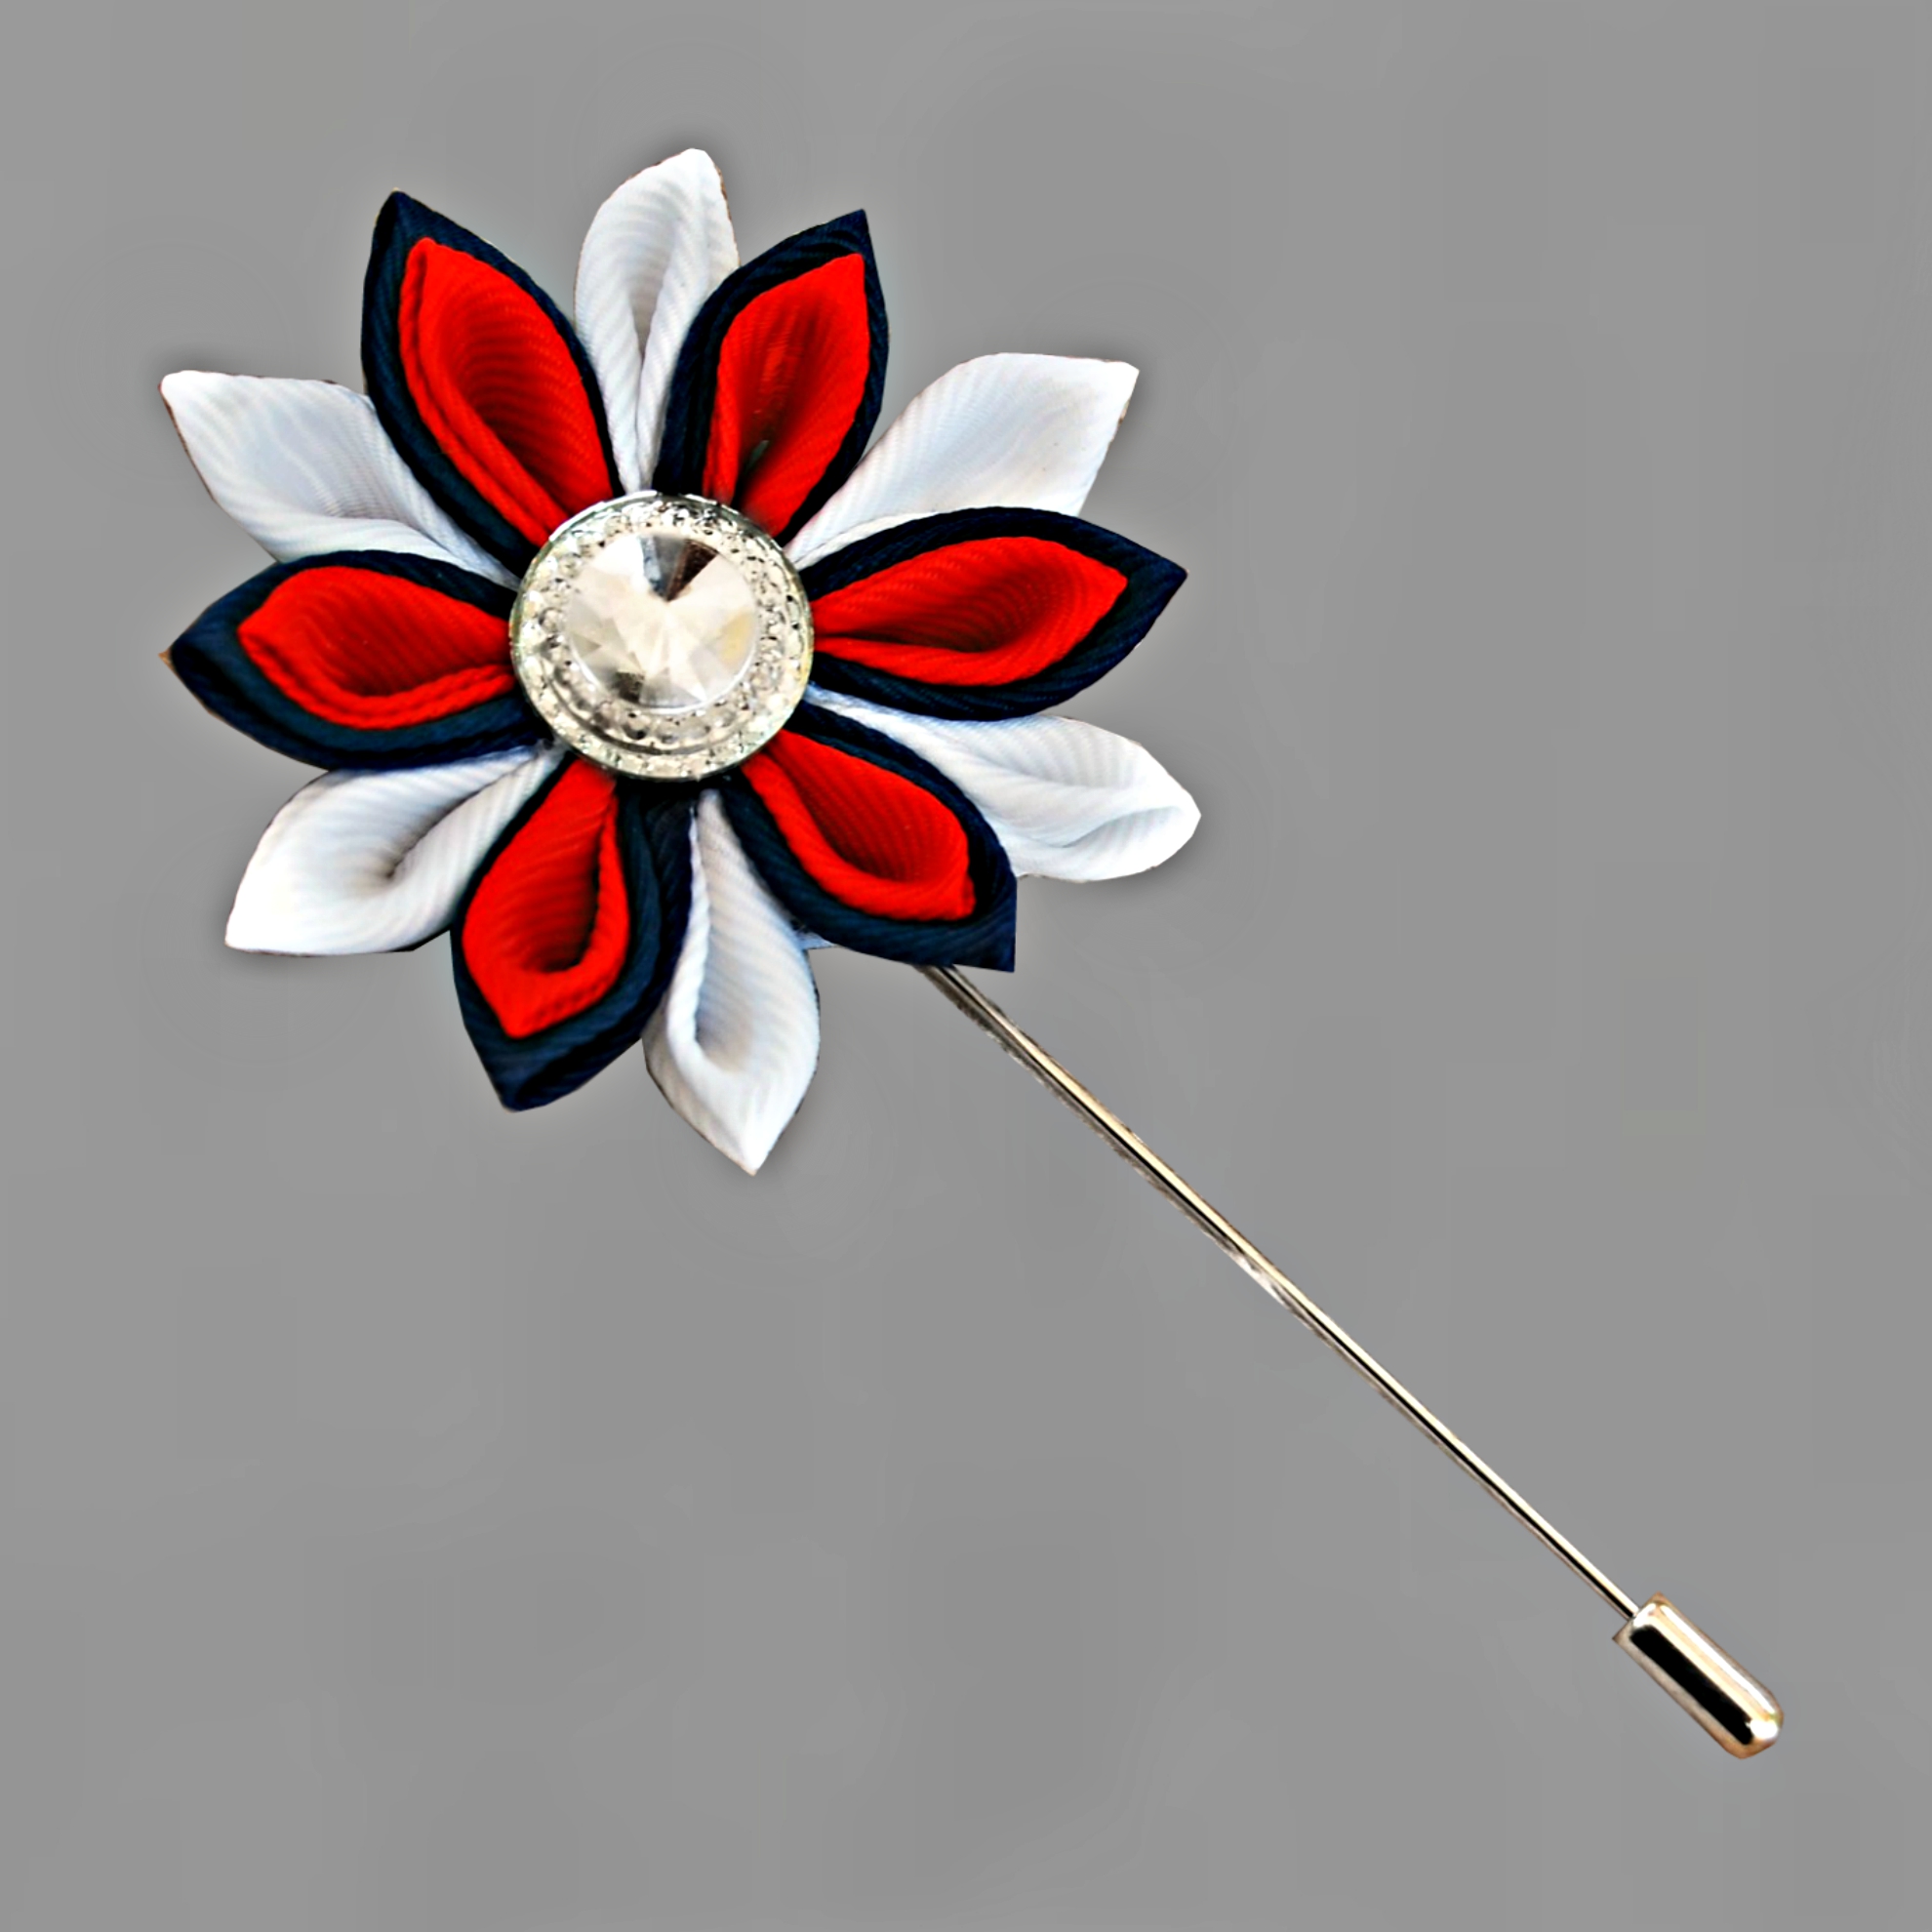 Knighthood Men's Lapel Pin Handmade Lapel Flower Stick Boutonniere Pin with a Gift Box for Suit Wedding Groom LP-26 